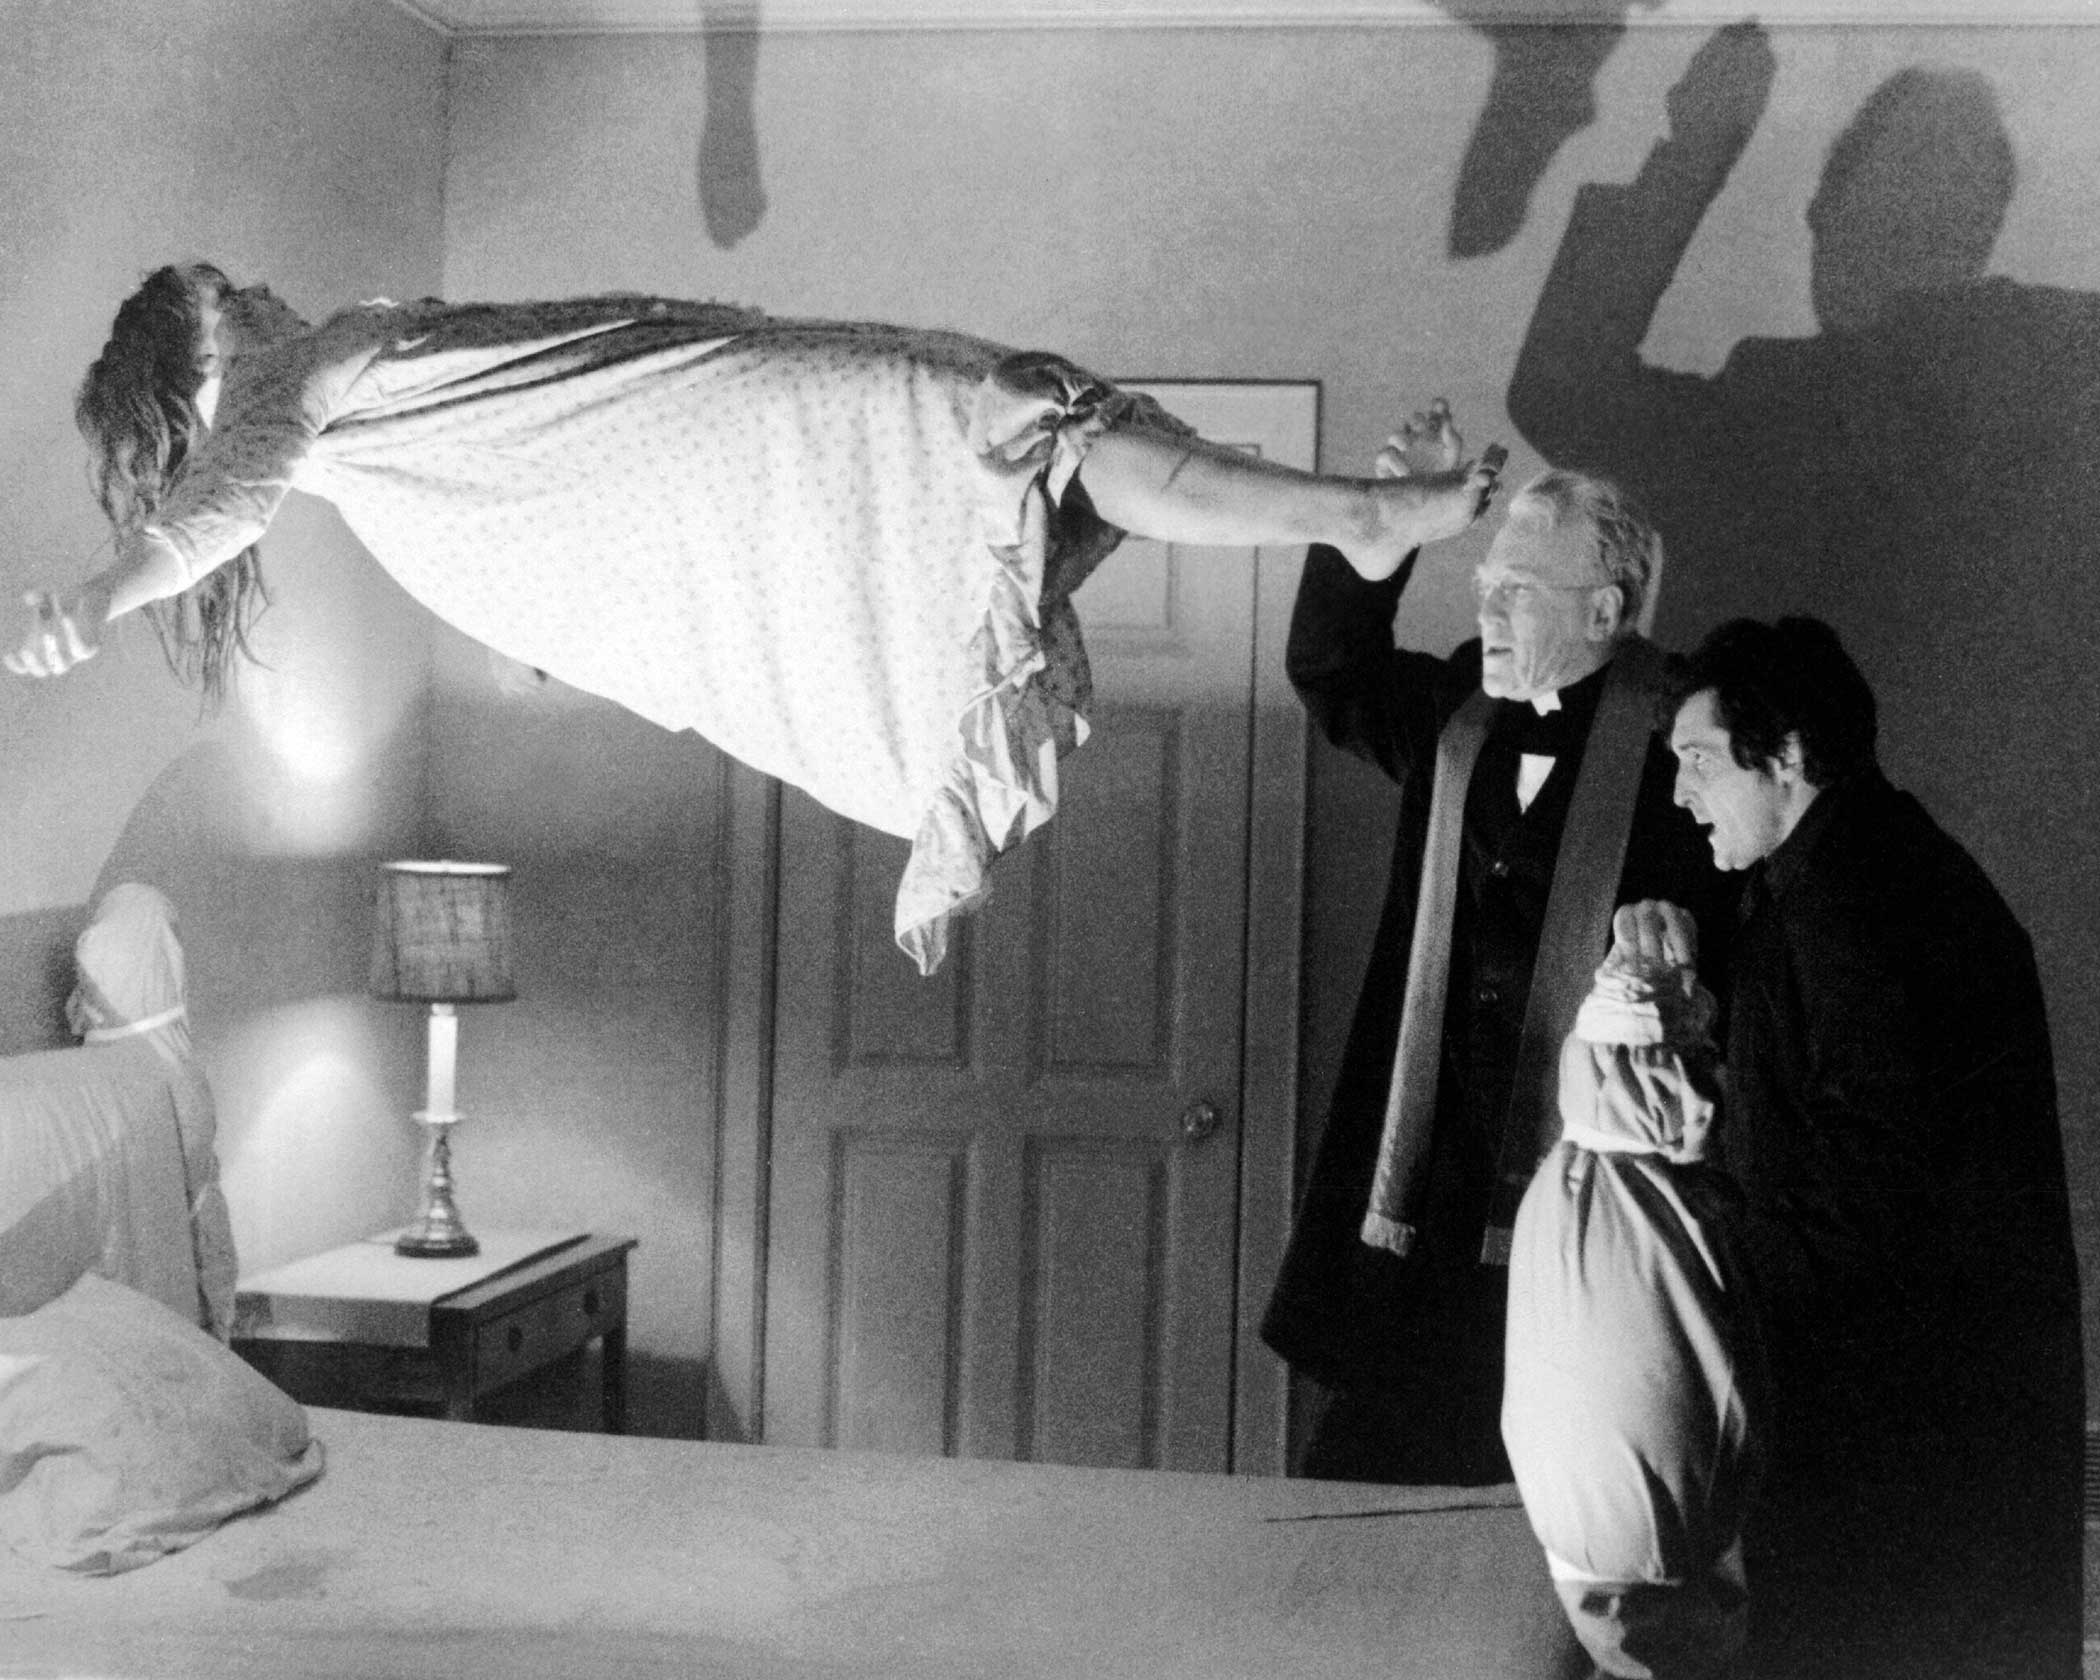 The Exorcist, 1973 Parts of the film's story were based on an exorcism performed on a Maryland boy, called "Roland Doe," in 1949. A Jesuit priest, Fr. William S. Bowdern, and Fr. Walter Halloran, were called in by the boy's family, because they thought his erratic and aggressive behavior was caused by demonic possession.